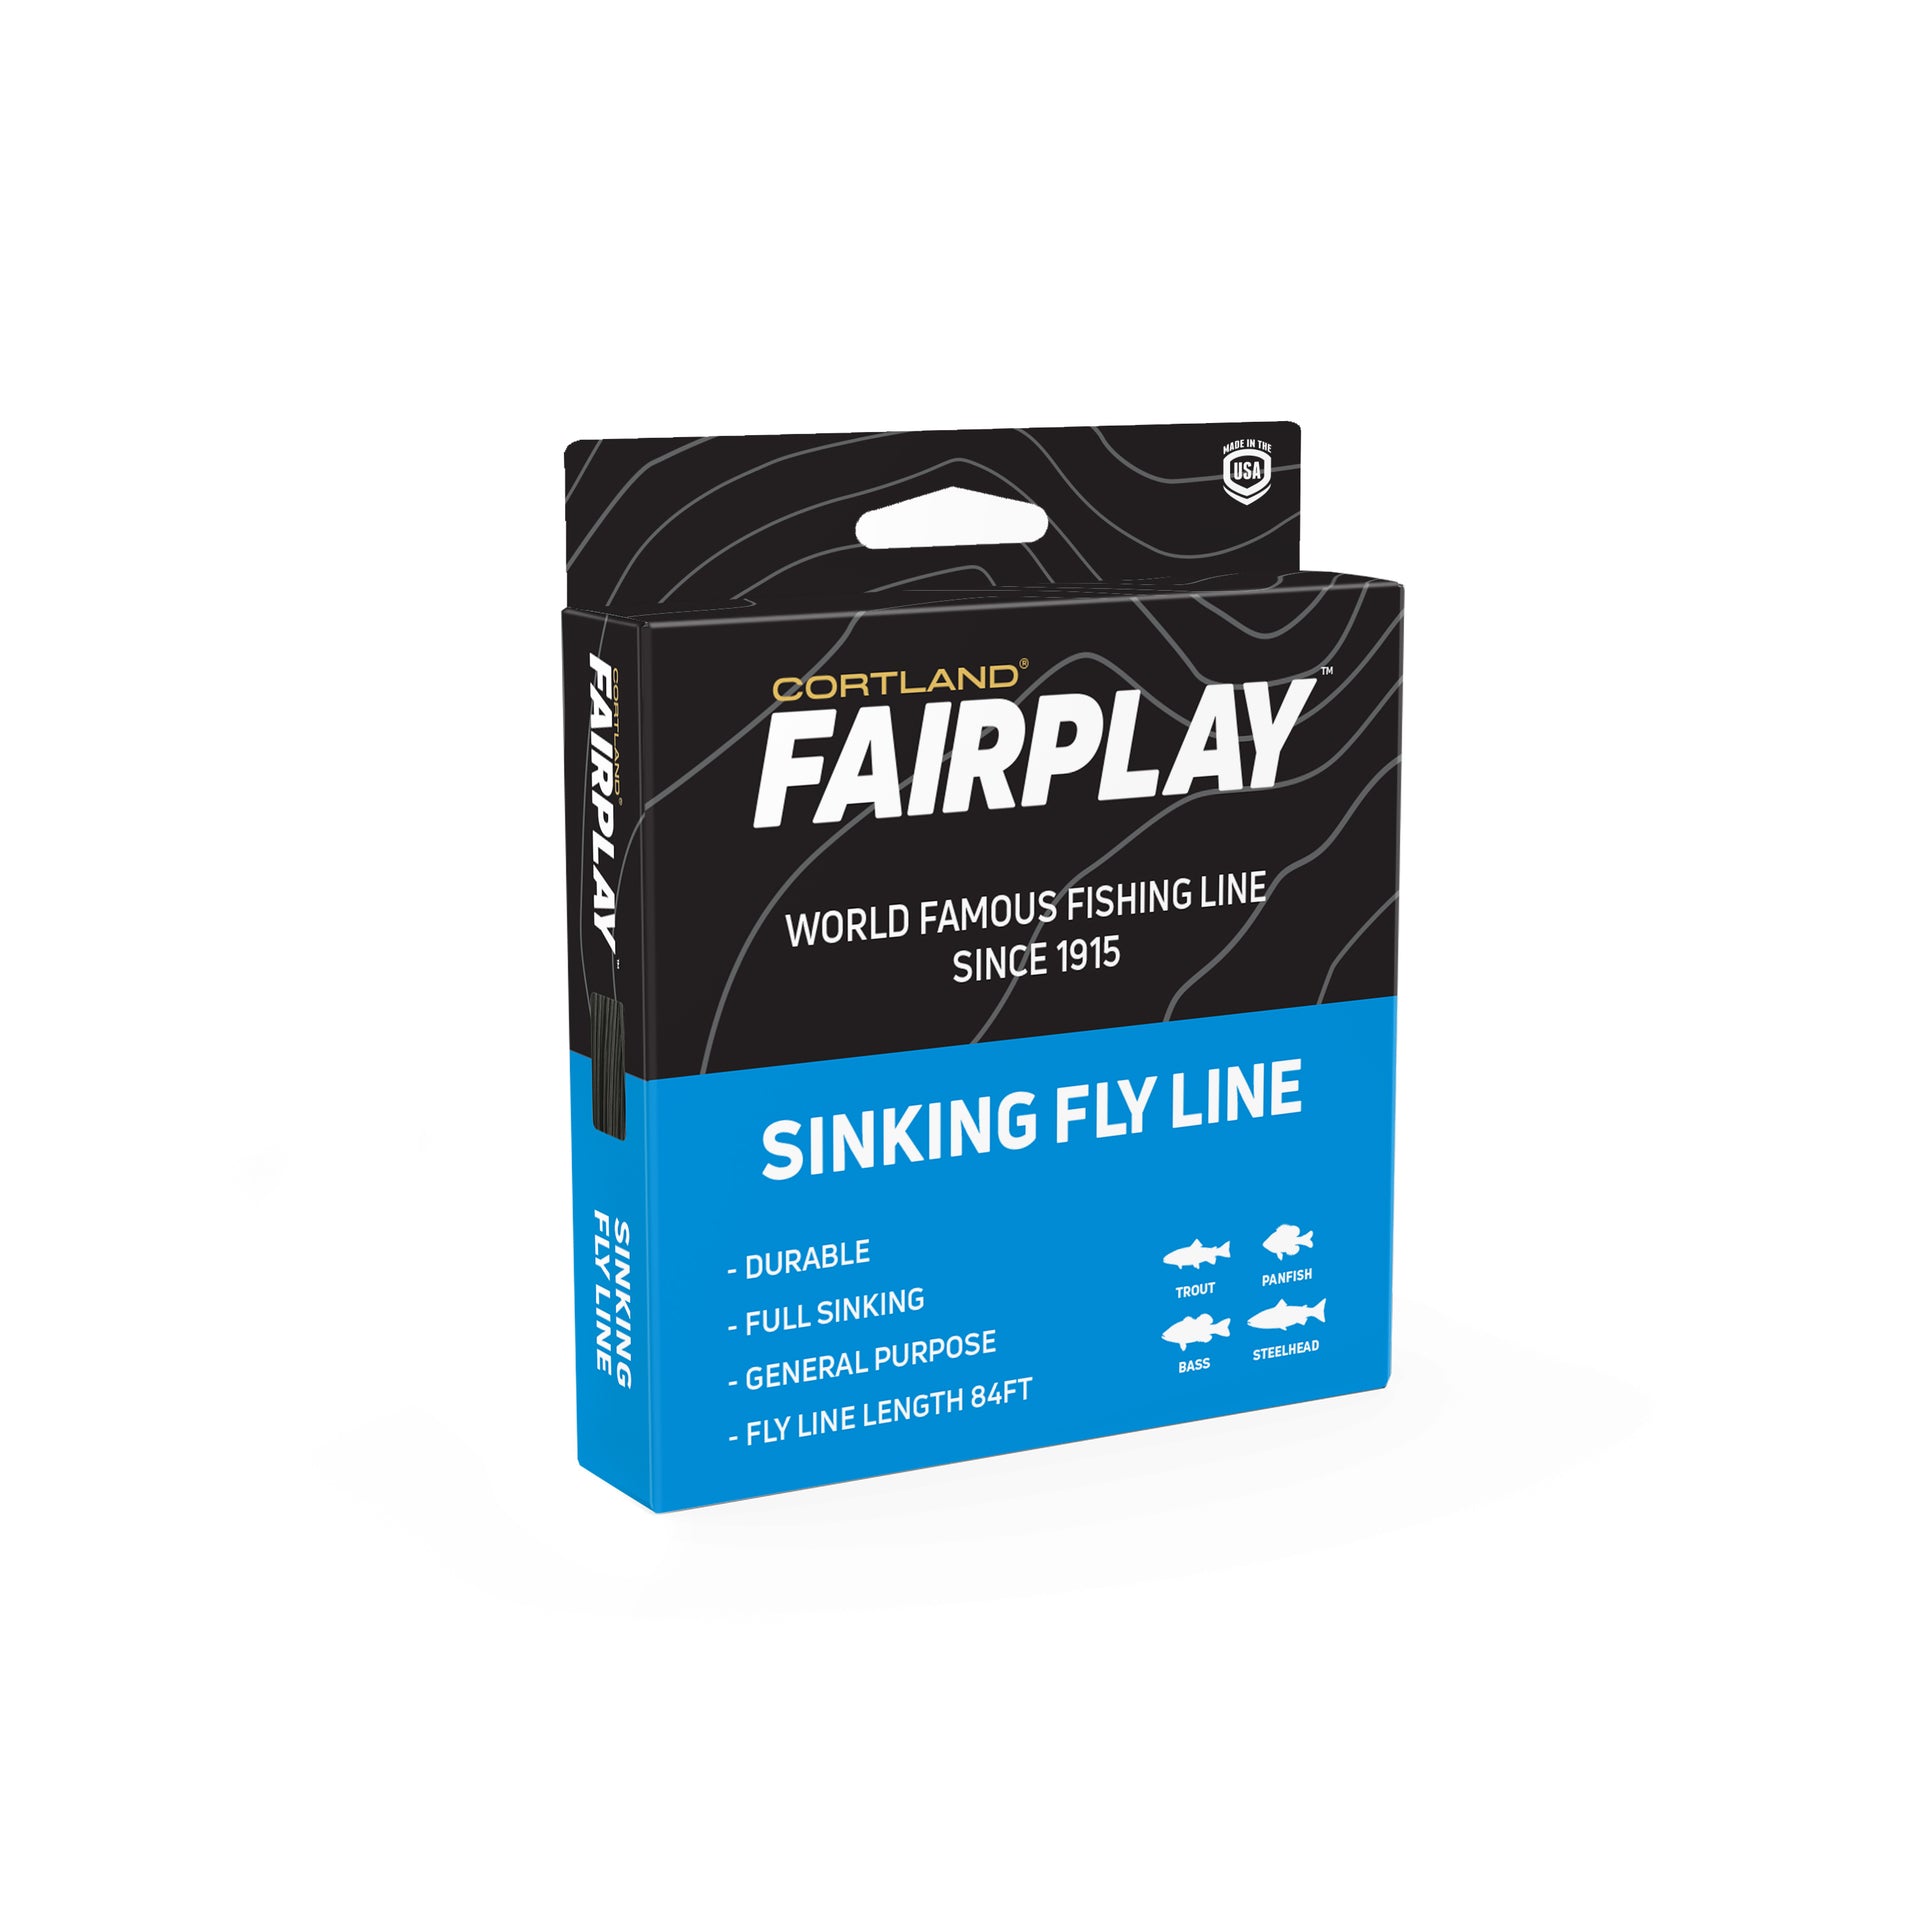 Cortland Fairplay Sinking Fly Line Type 2 - Brown - WF5S